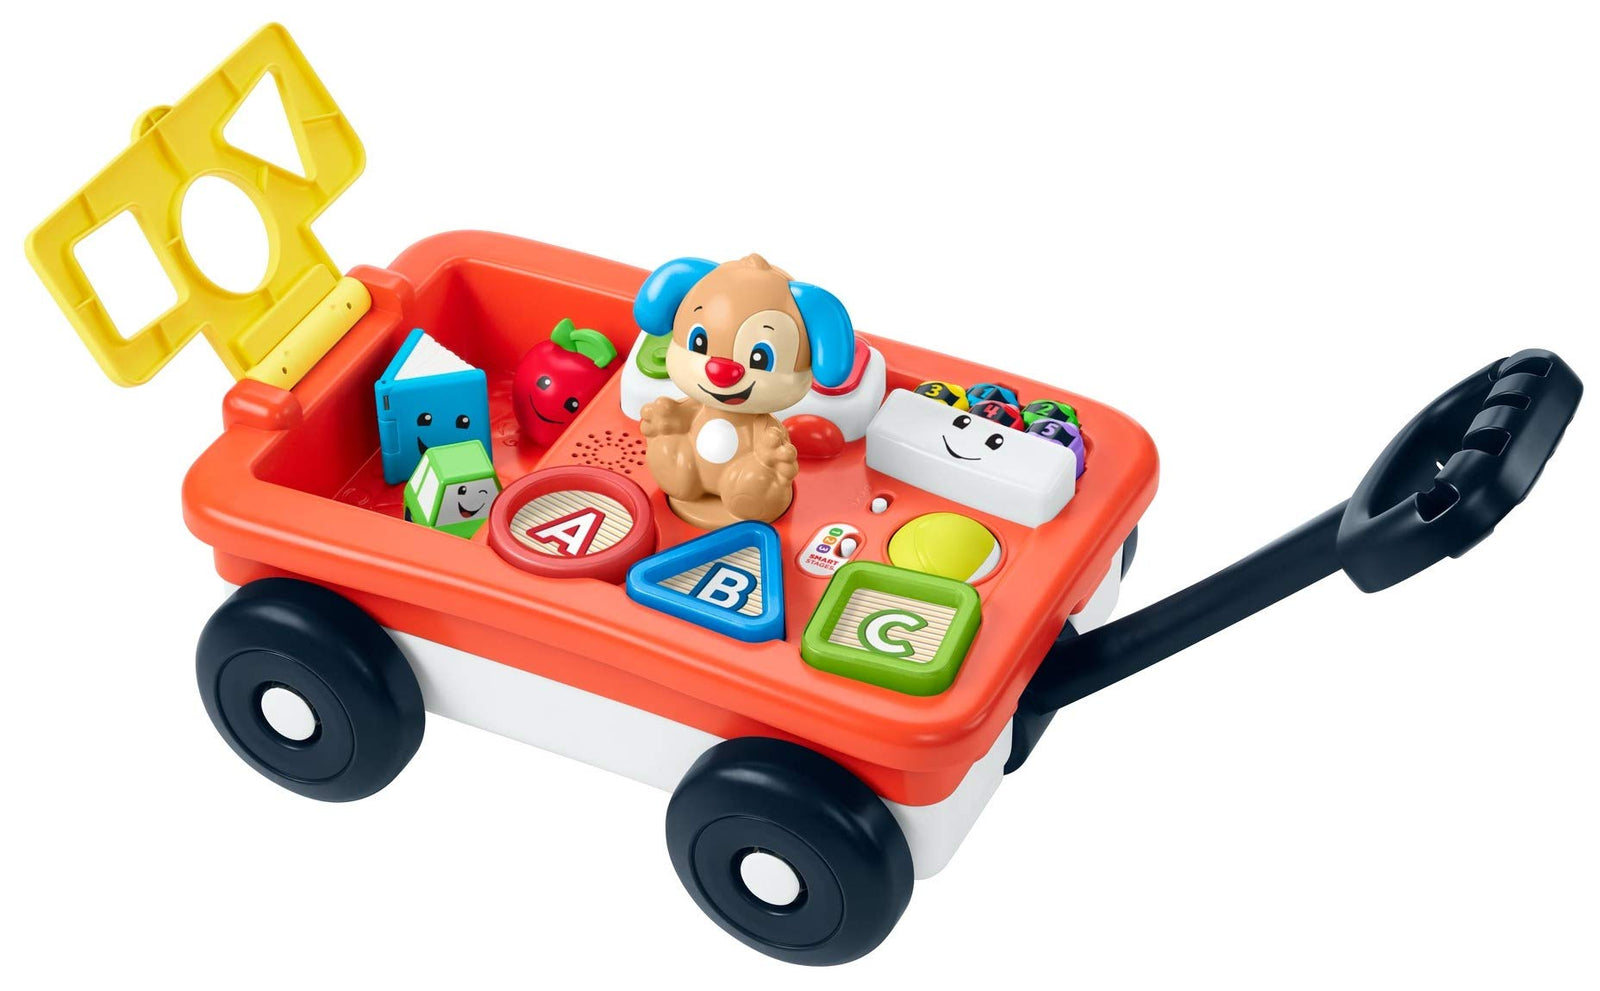 Fisher-Price Laugh & Learn Pull & Play Learning Wagon, pull-toy wagon with music, lights, and learning songs for babies & toddlers ages 6-36 months [Amazon Exclusive]